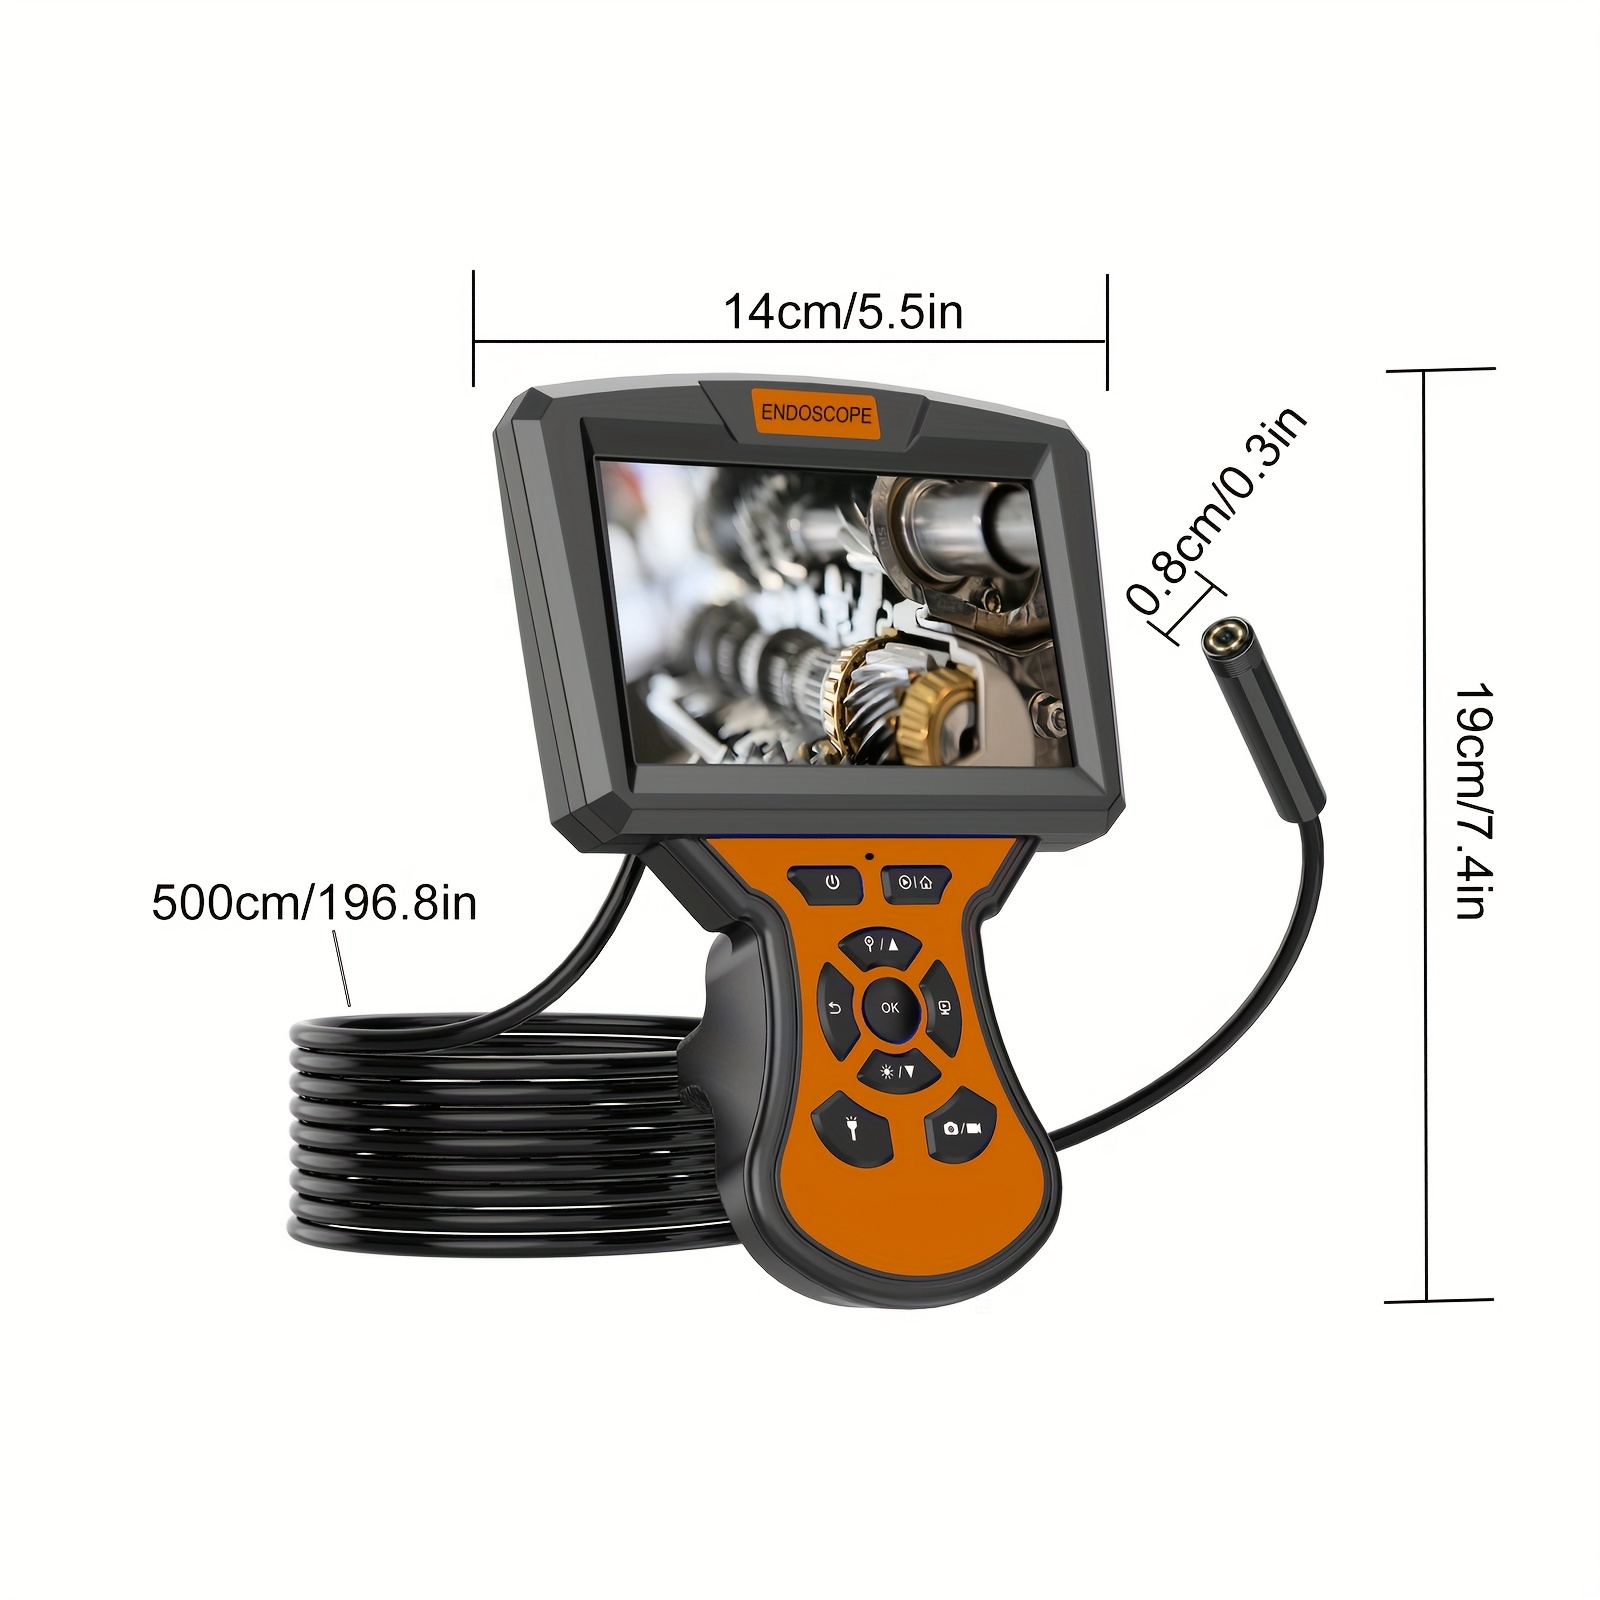  Industrial Endoscope, 1080P HD Digital Borescope Inspection  Camera with 8mm IP67 Waterproof Camera, Sewer Camera with 2.8 IPS Screen,  16.5FT Semi-Rigid Cable. : Industrial & Scientific